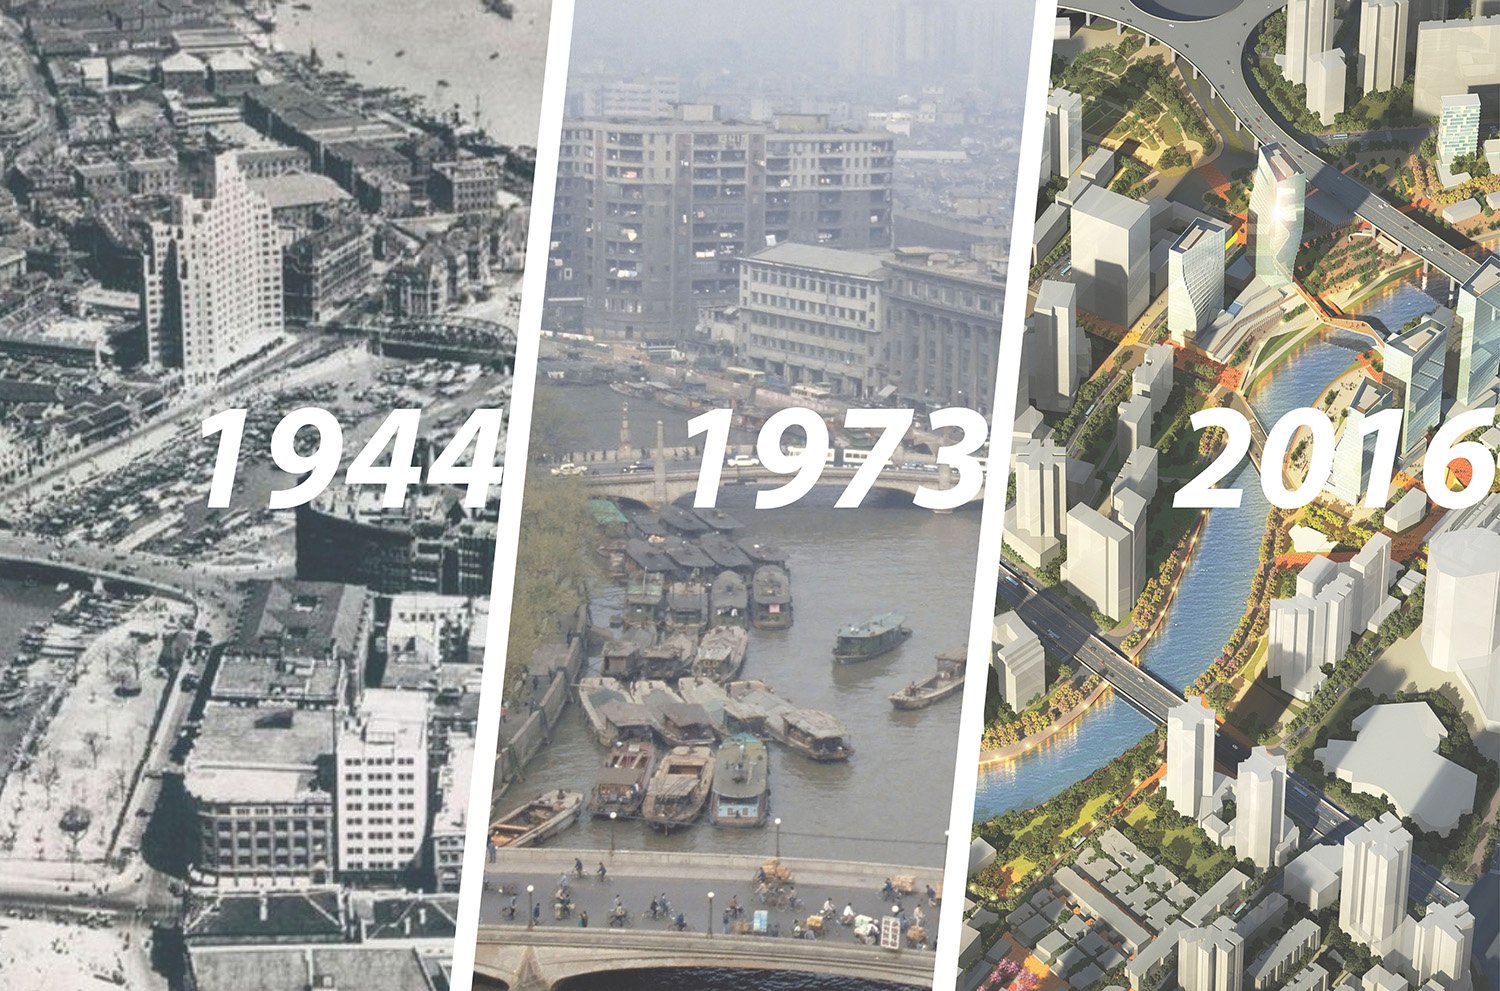 Economic Growth and Environmental Degradation: Suzhou Creek has witnessed the genesis of Shanghai’s industrialization, suffered from severe pollution, and is poised to be celebrated as the city’s newest pu | 